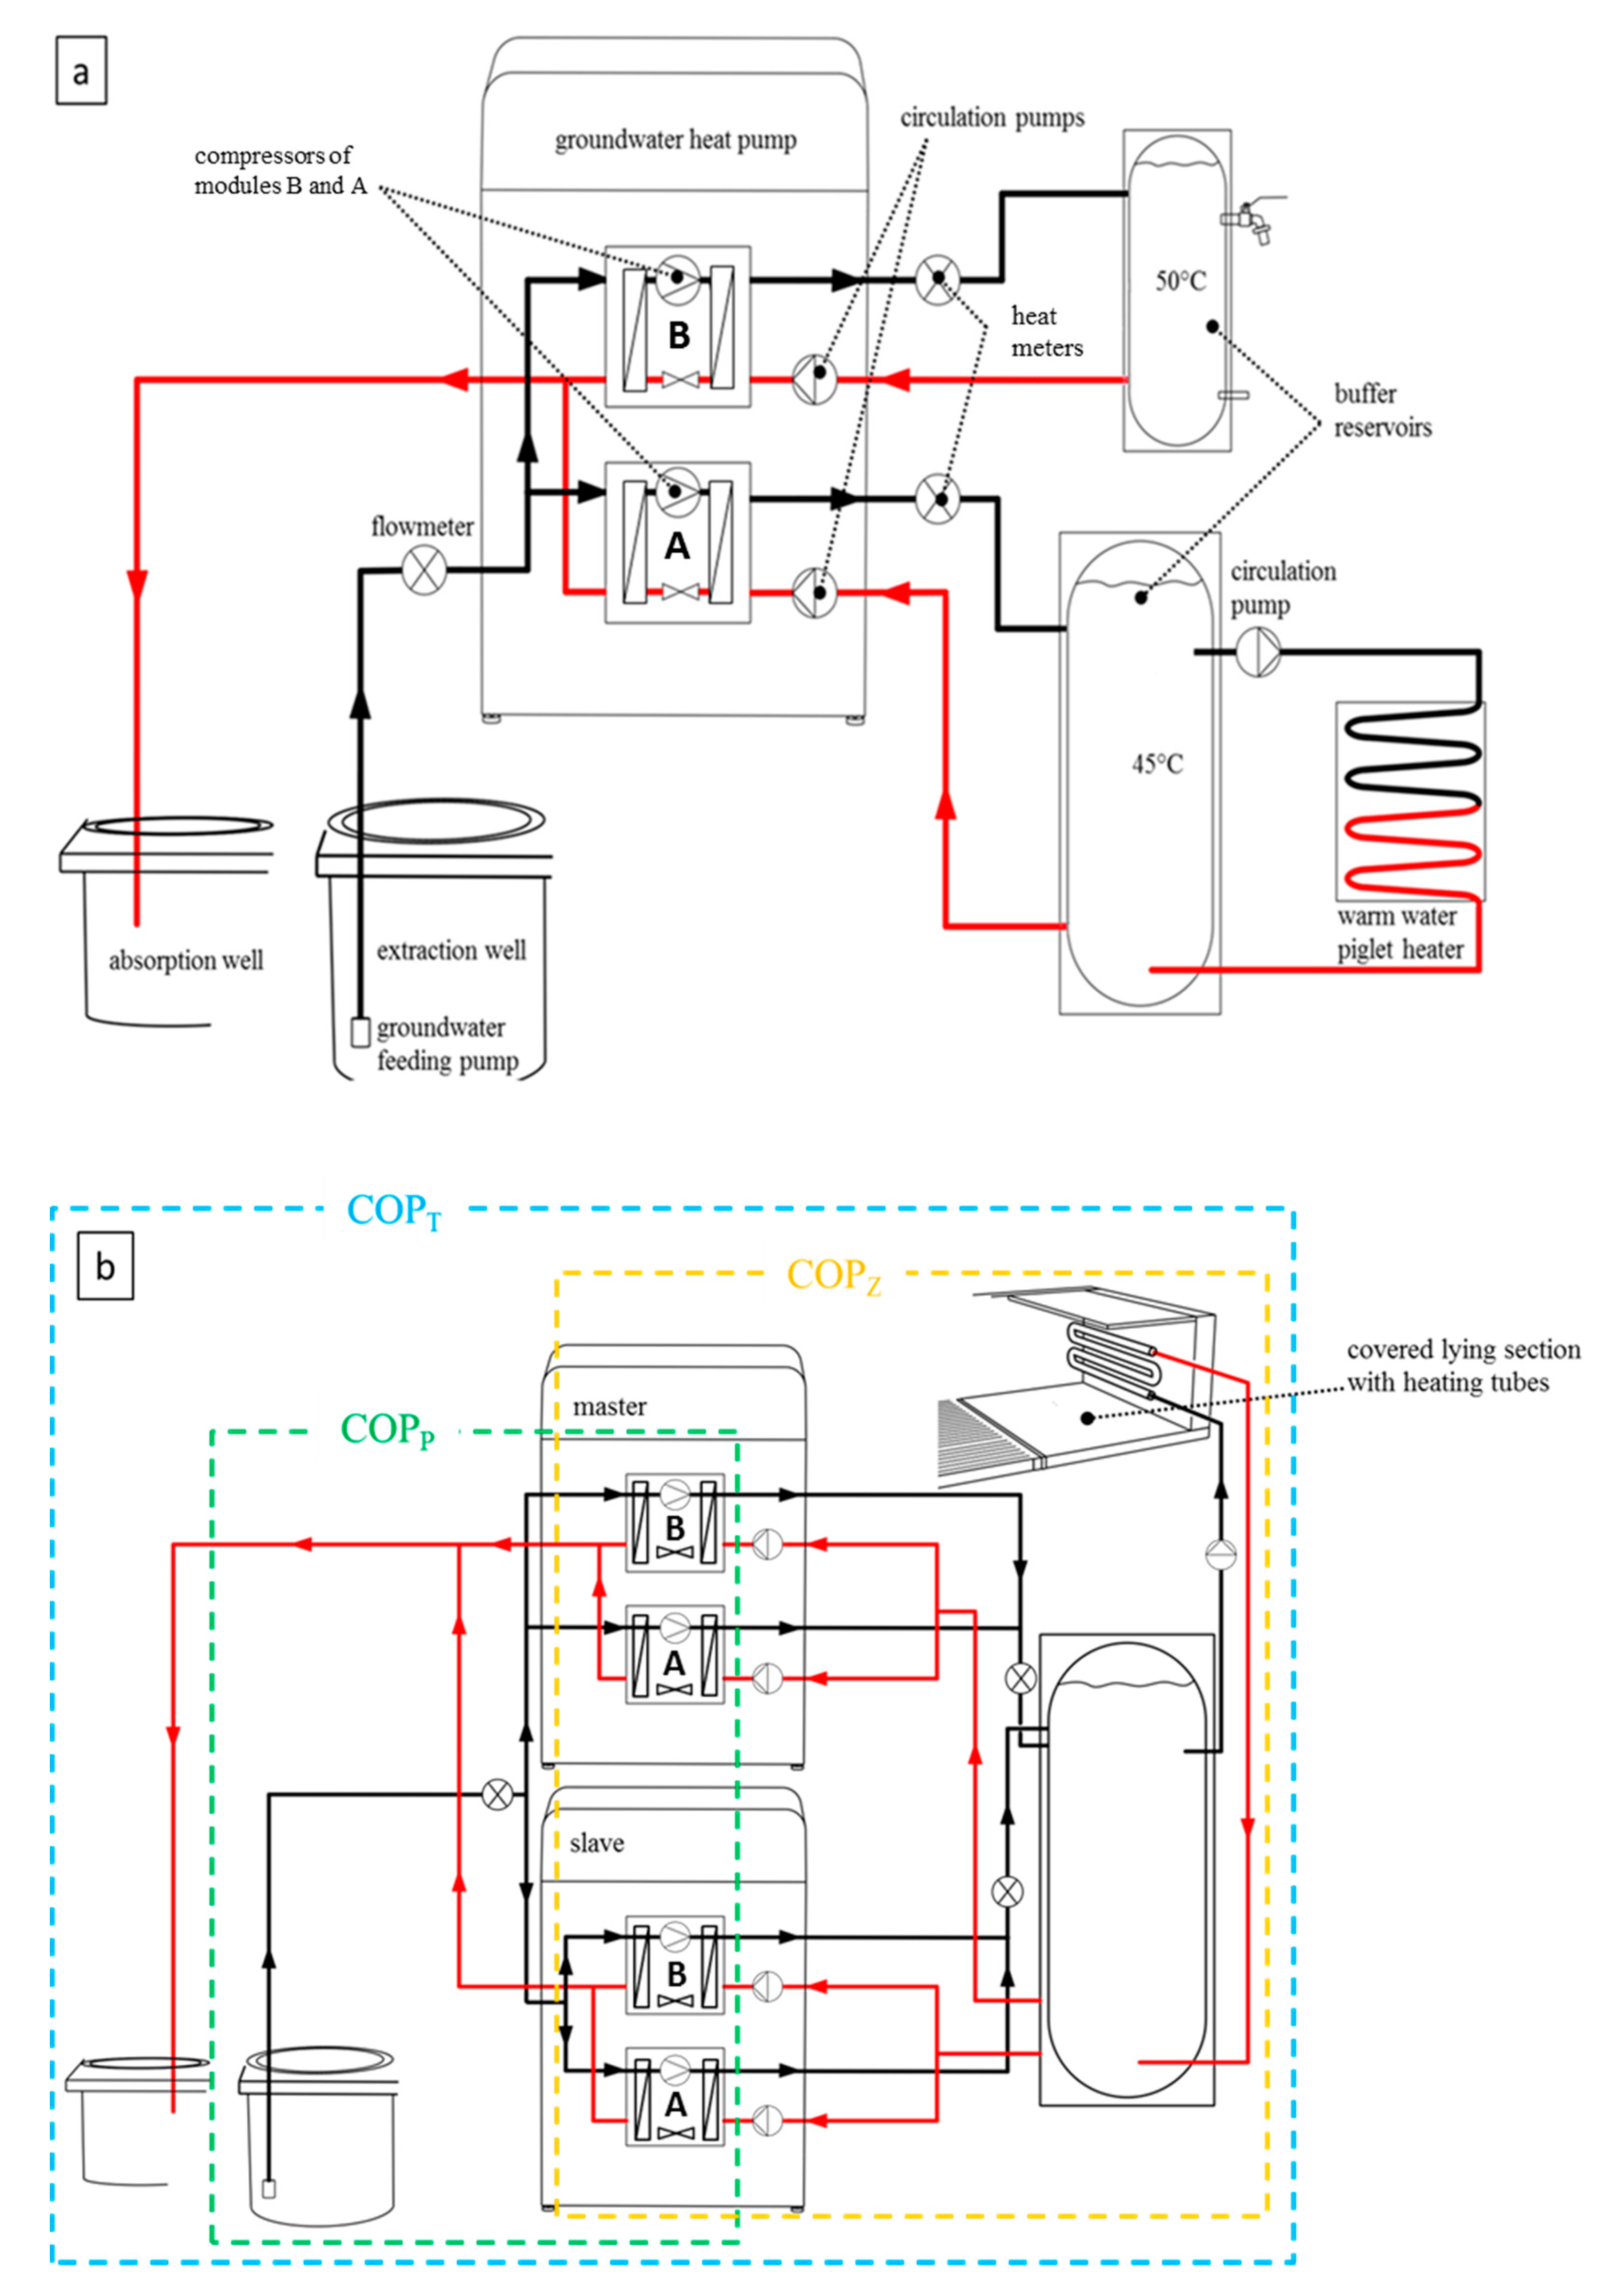 Wiring Diagram For Heat Pump For Thermo Pride Oil Furnace - Collection - Wiring Diagram Sample